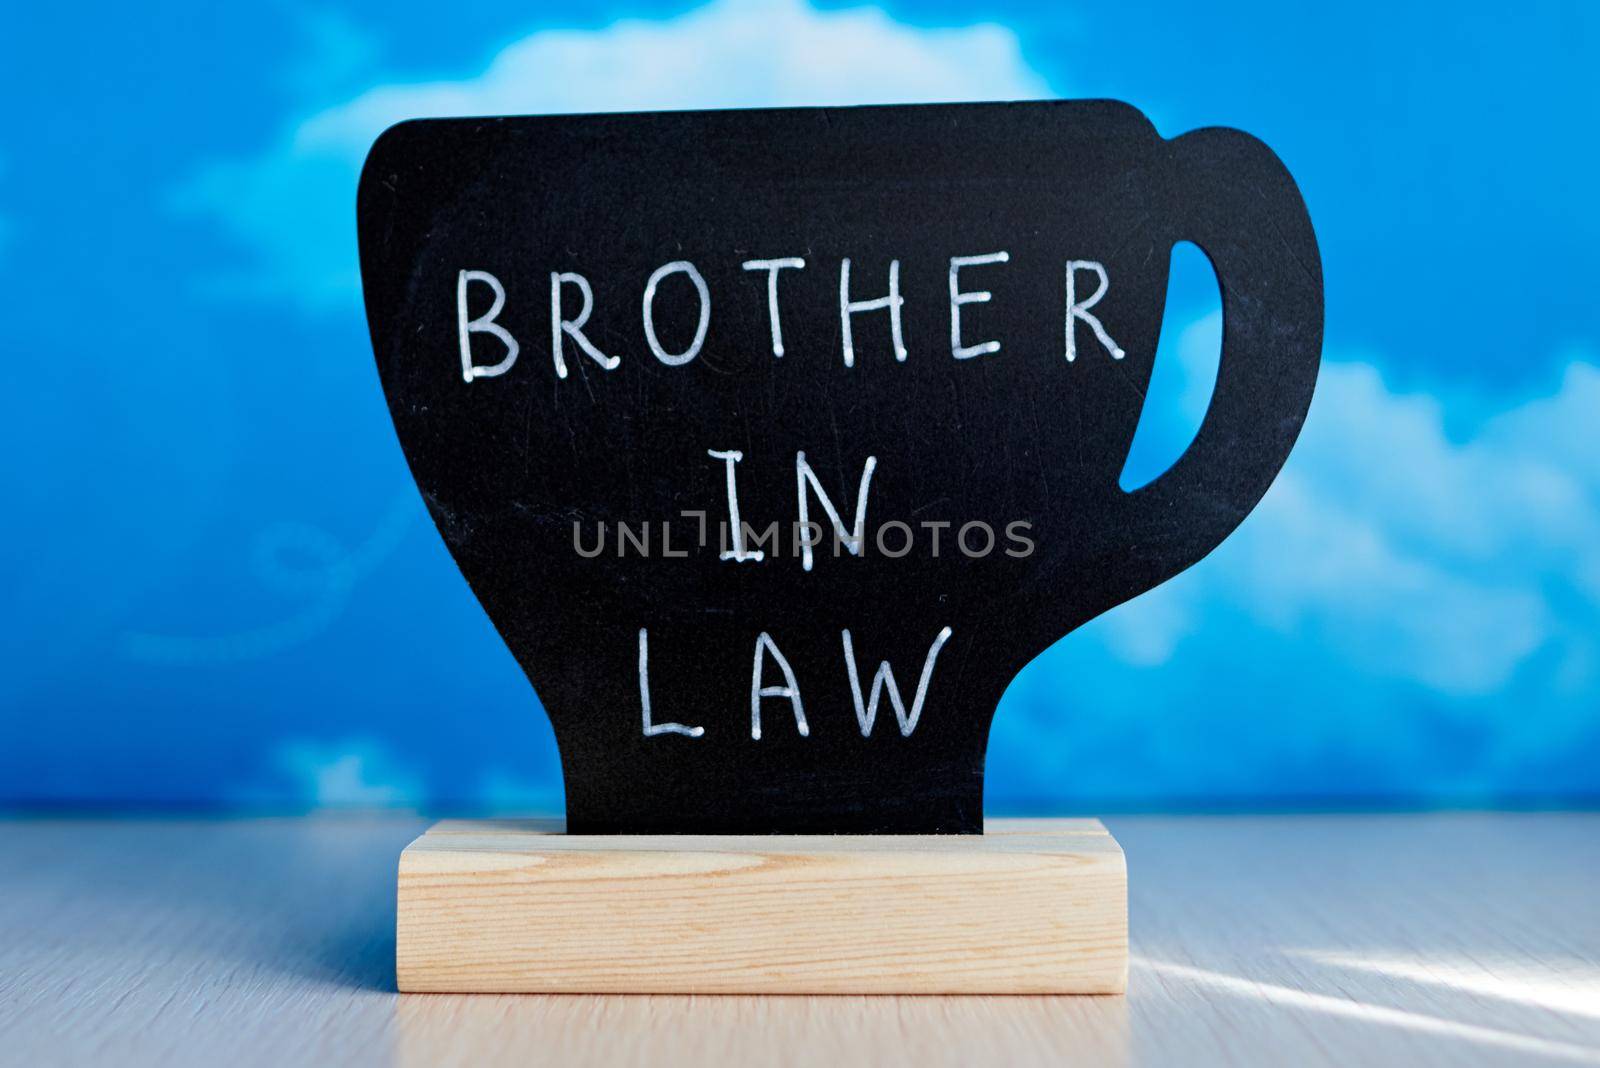 Chalk table tent with english word "Brother in law" written by white chalk marker